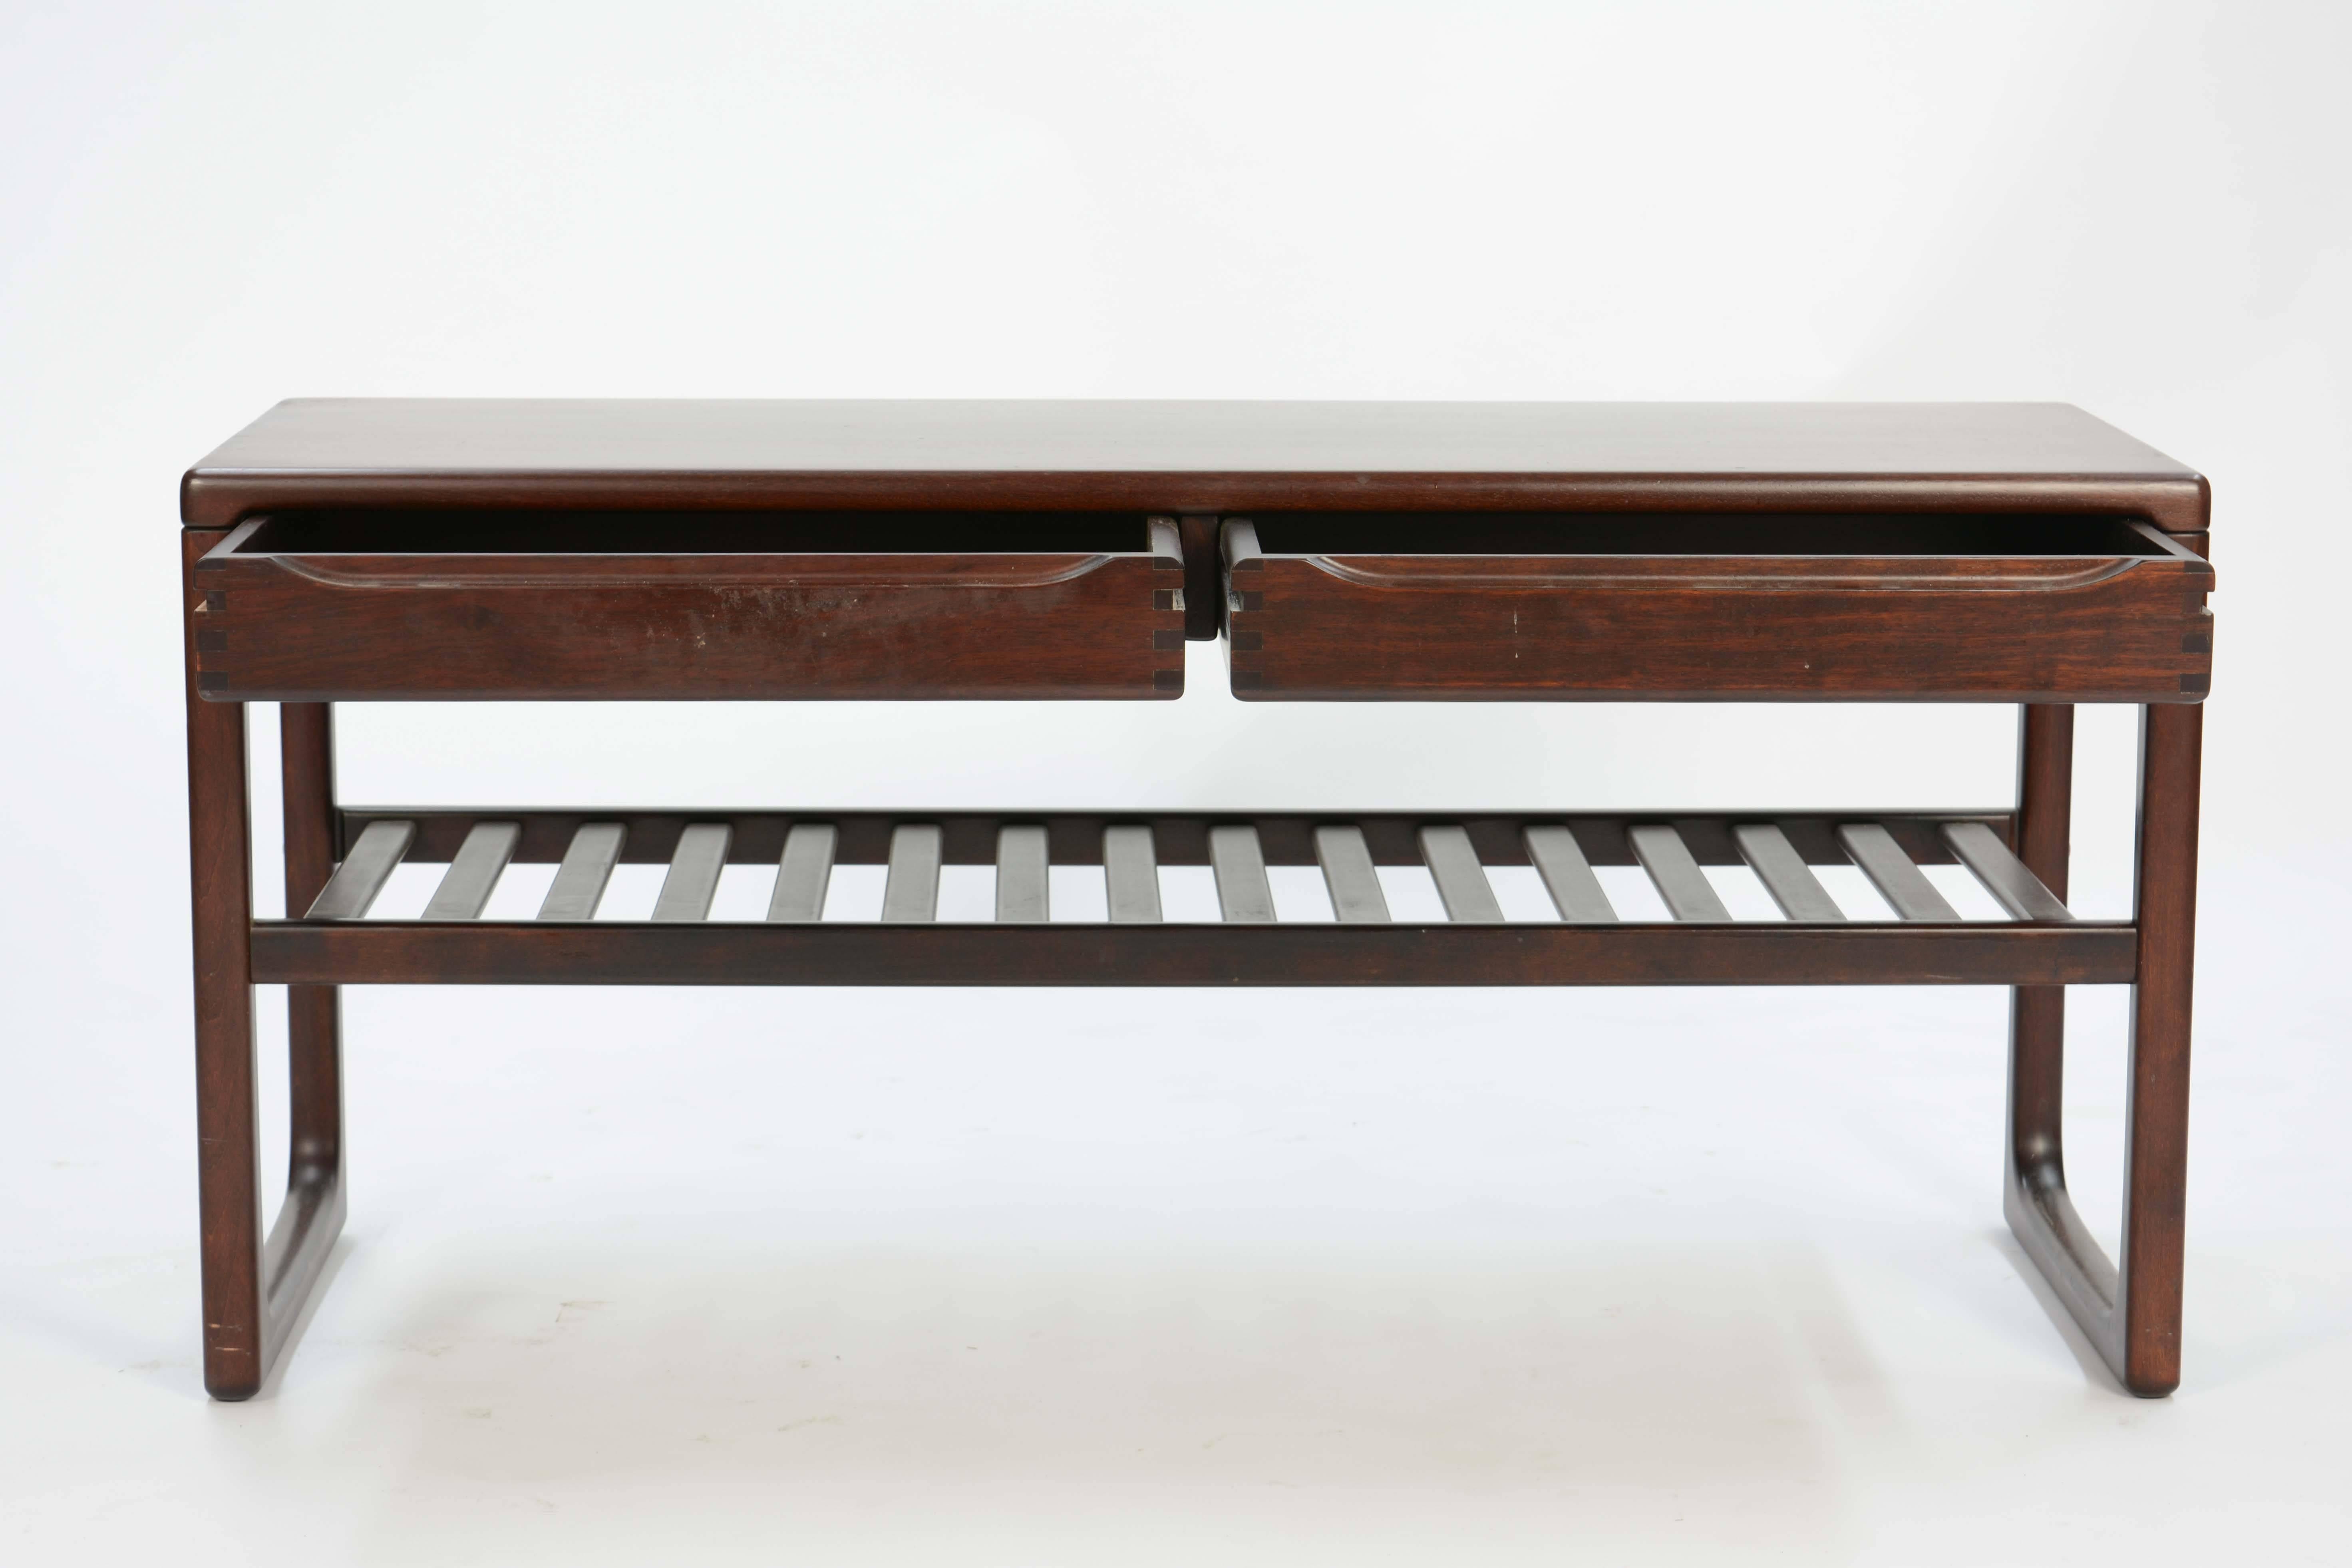 Ole Wanscher entry bench in mahogany.